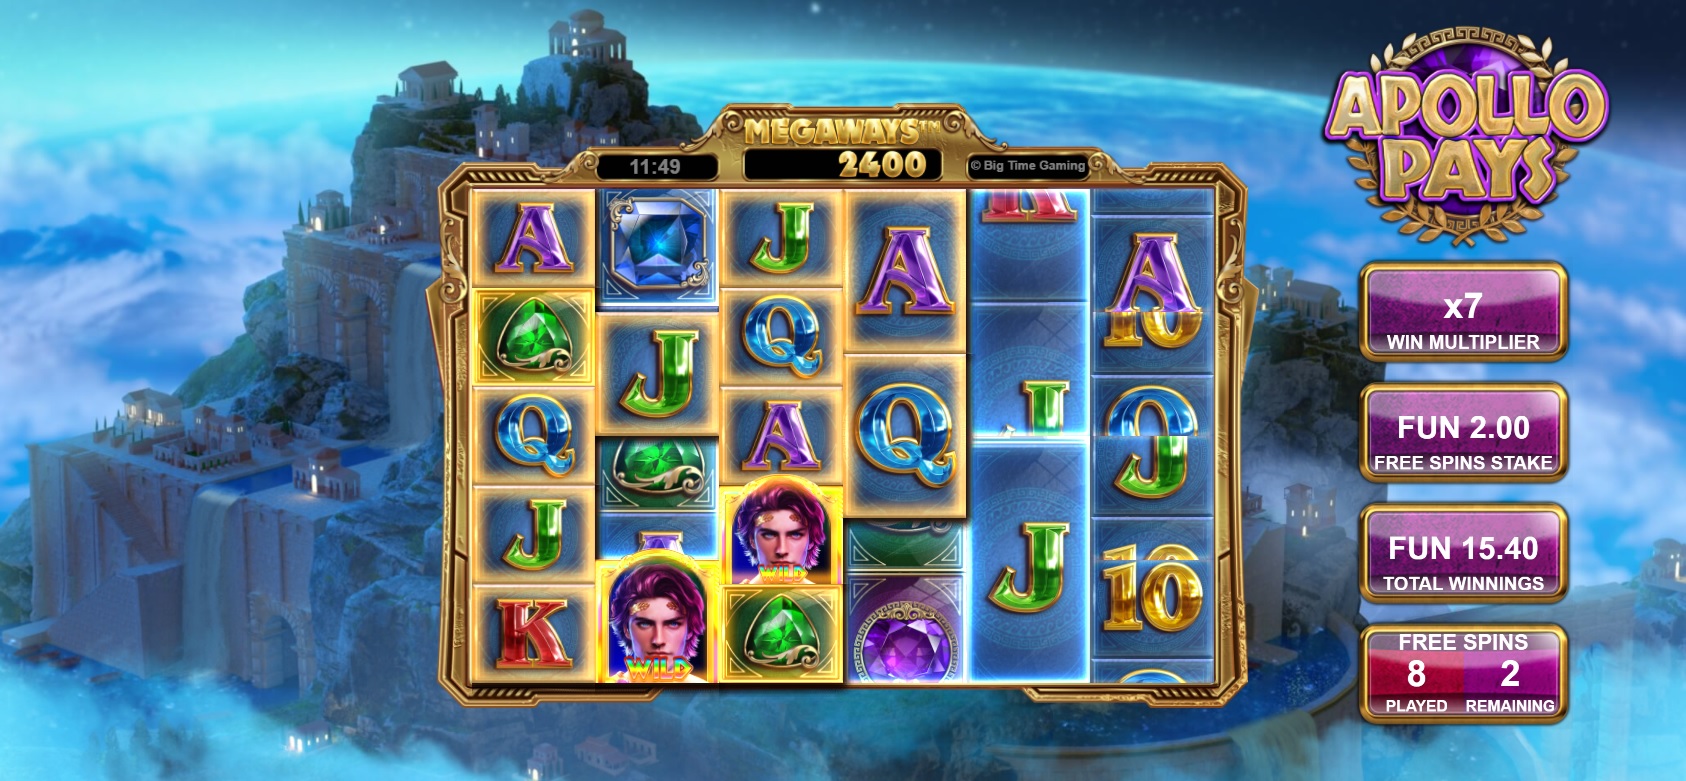 Apollo Pays slot, Free spins feature